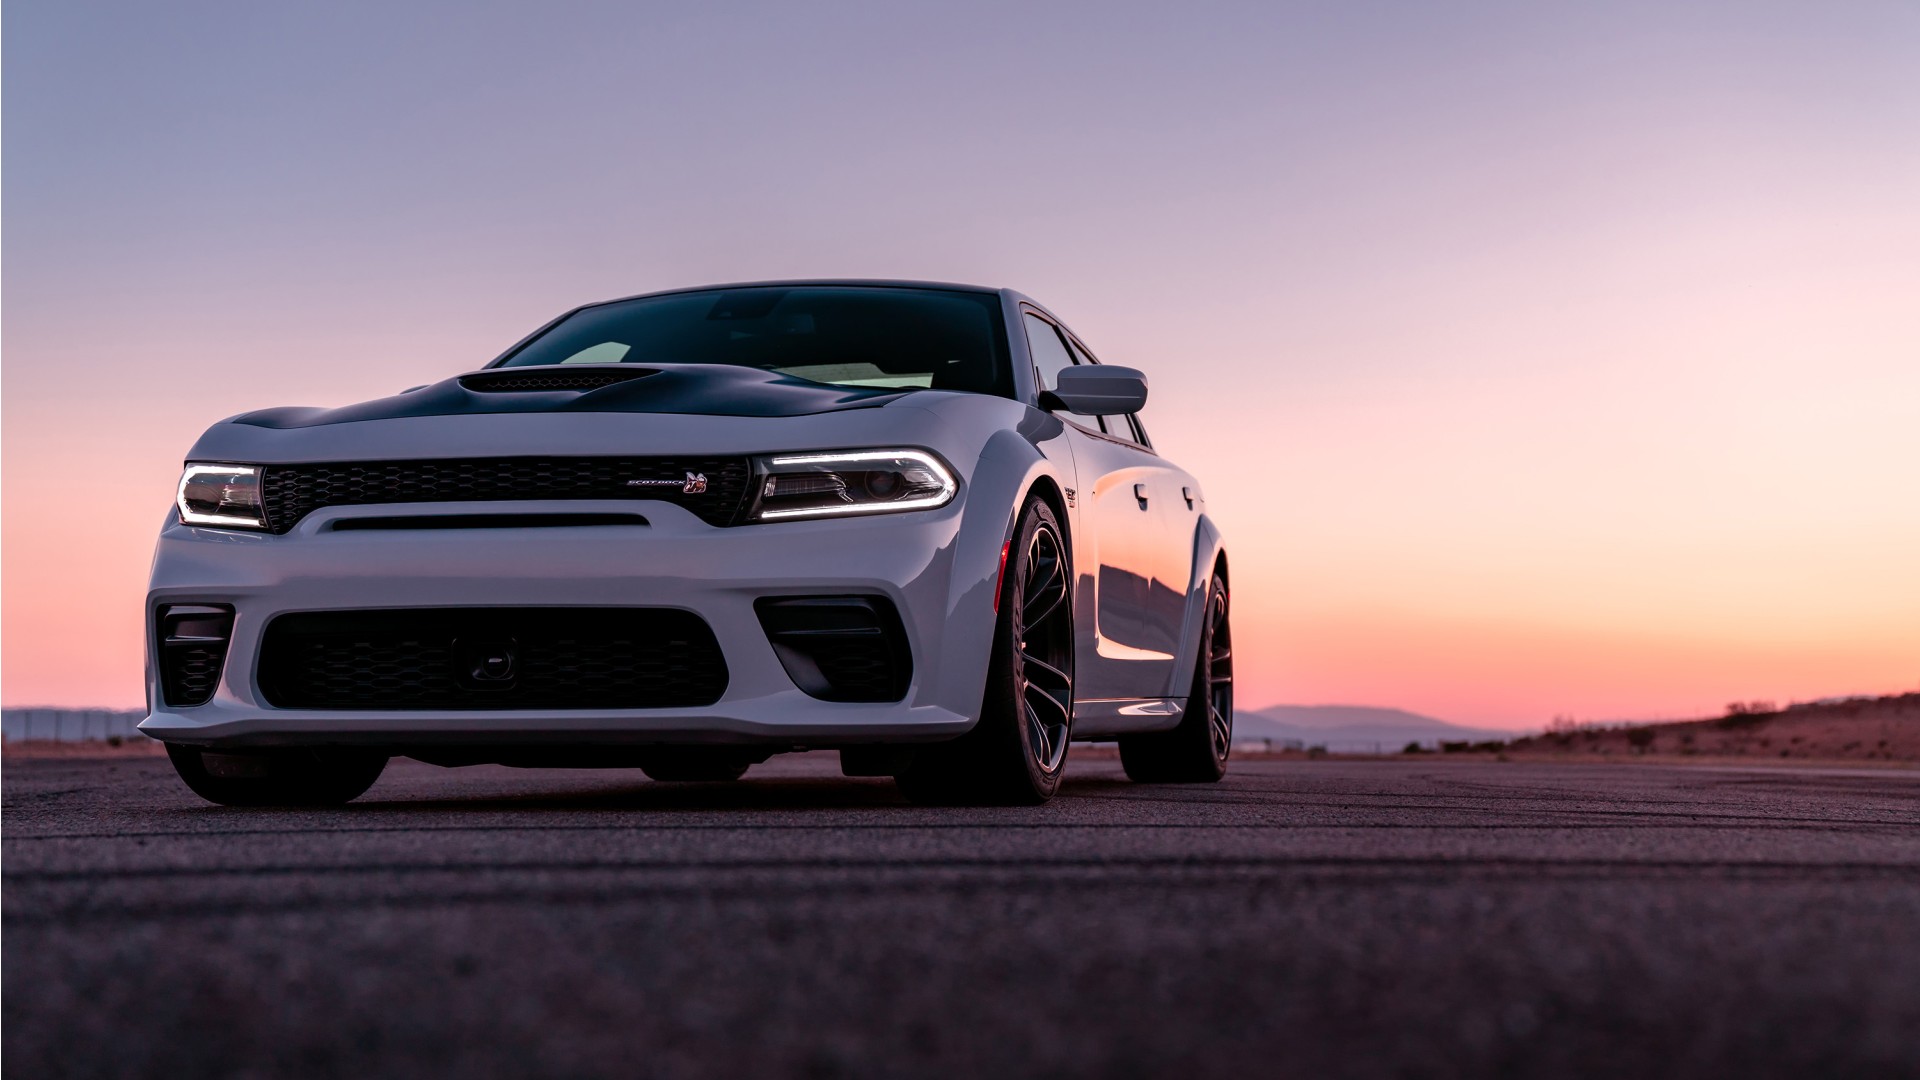 2020 Dodge Charger Scat Pack Widebody Wallpaper | HD Car ...